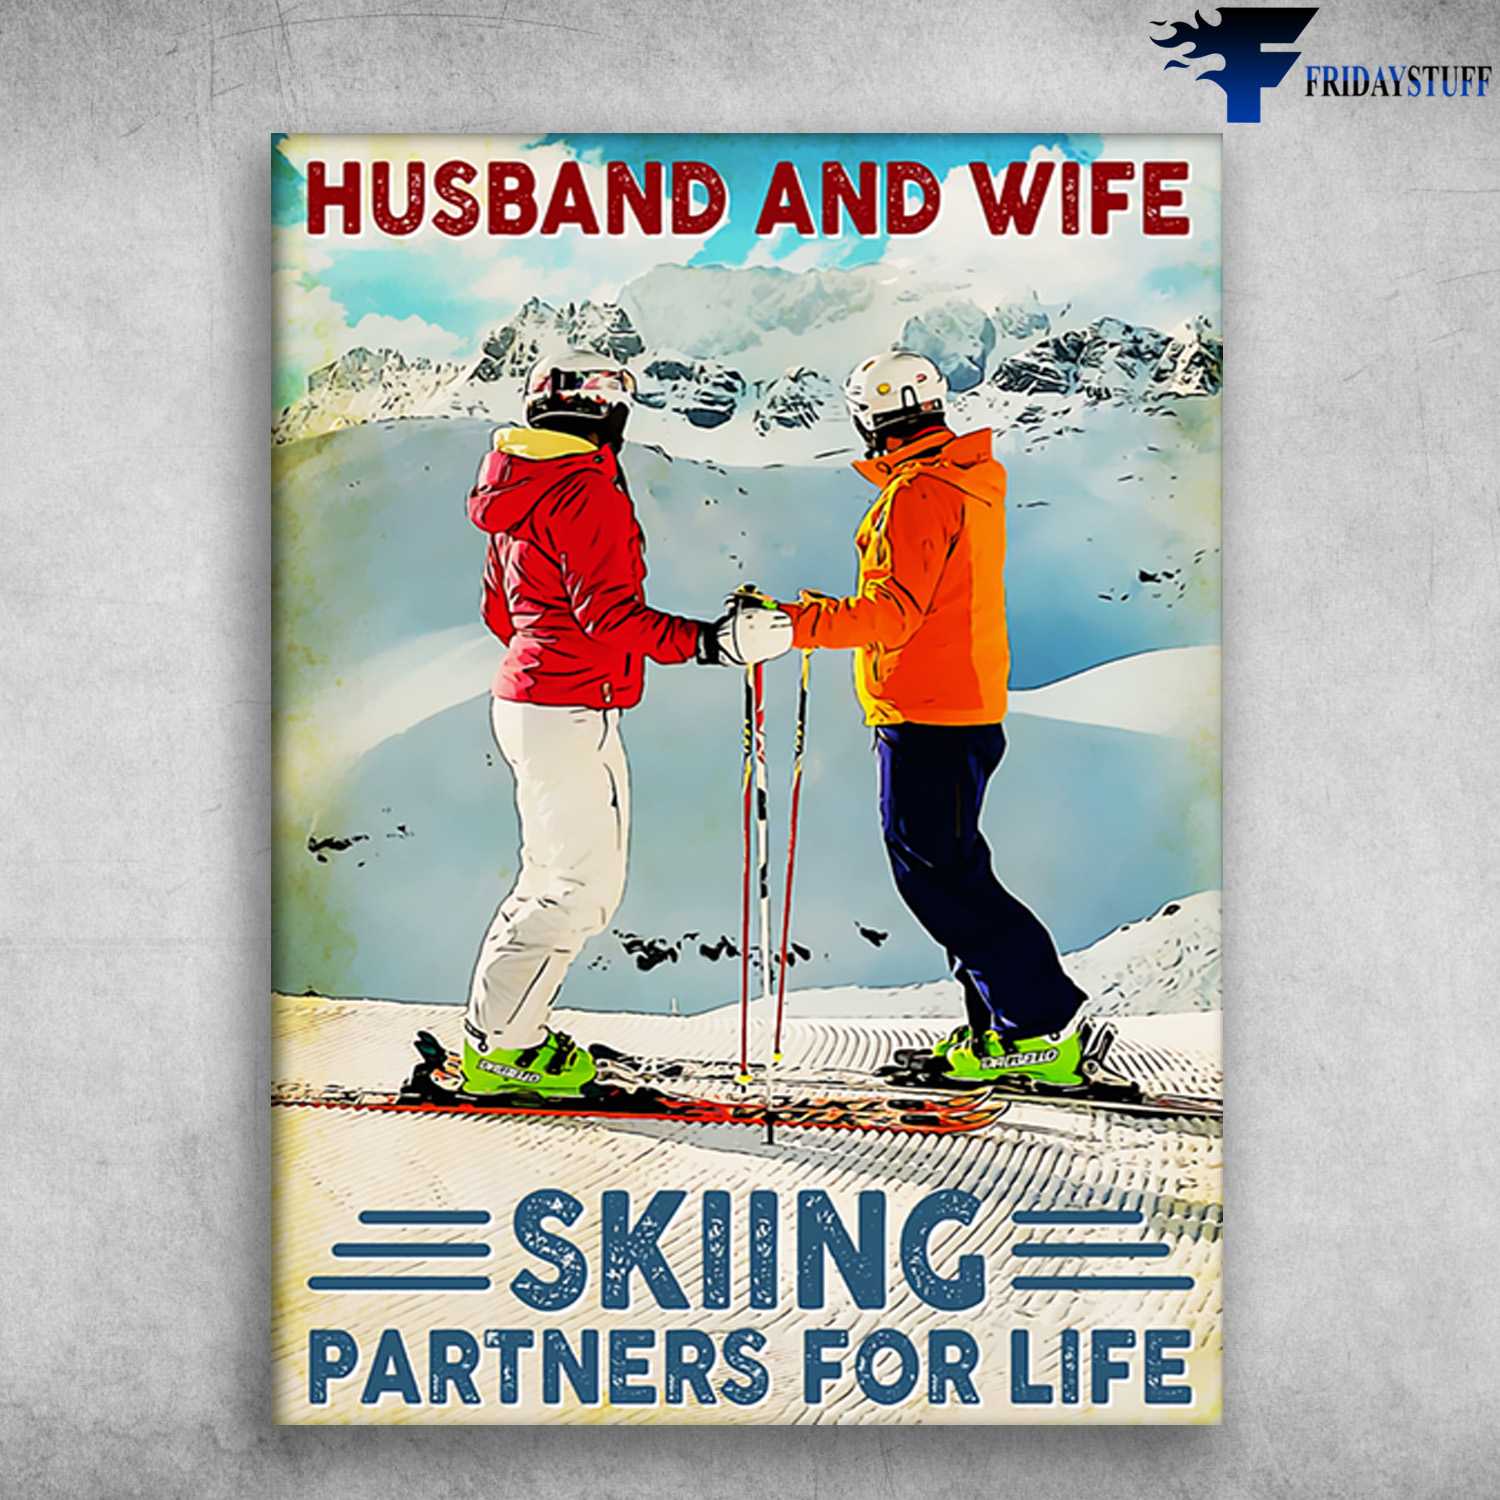 Skiing Lover, Skiing Couple, Husband And Wife, Skiing Partners For Life